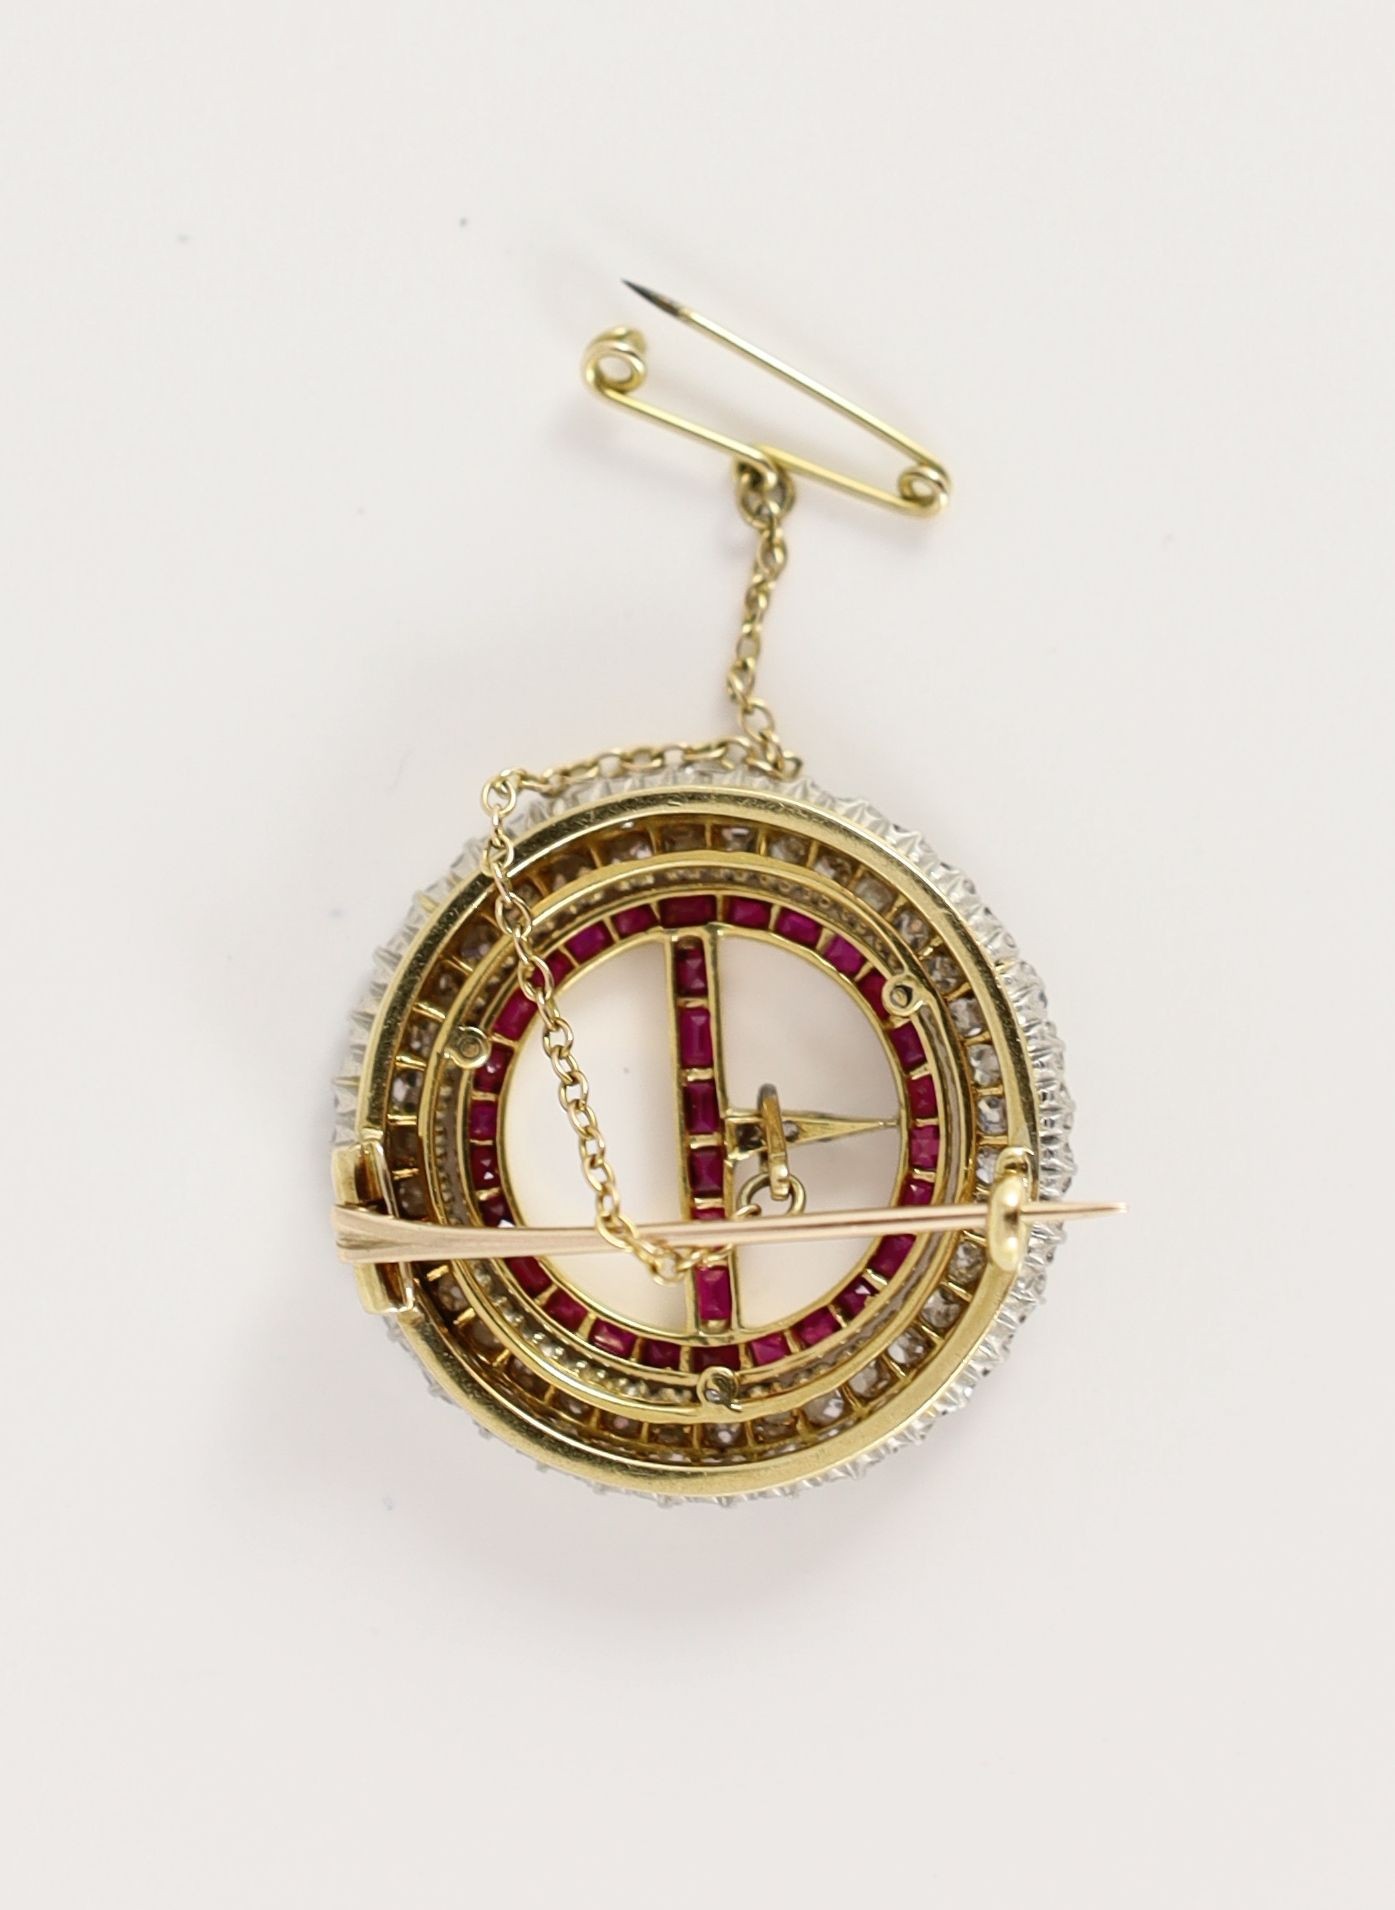 A 20th century gold and platinum, ruby and diamond set openwork circular 'buckle' brooch